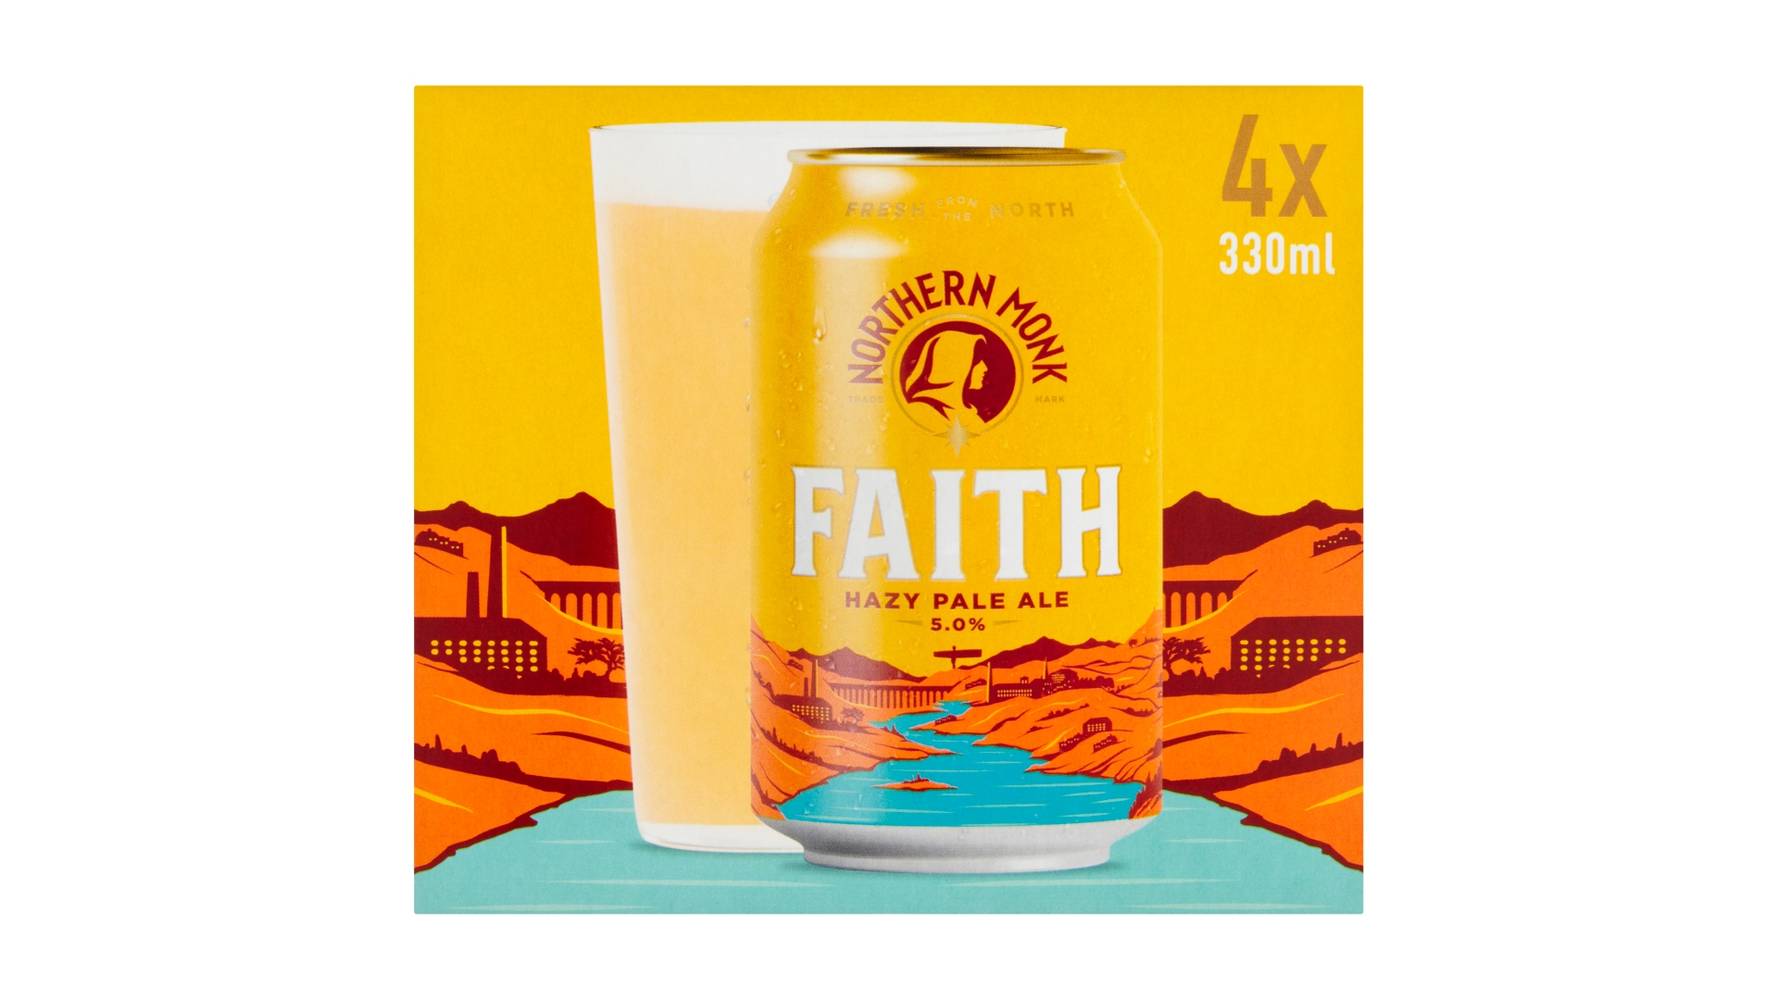 Northern Monk Faith Hazy Pale Ale Beer (4 pack, 330 ml)